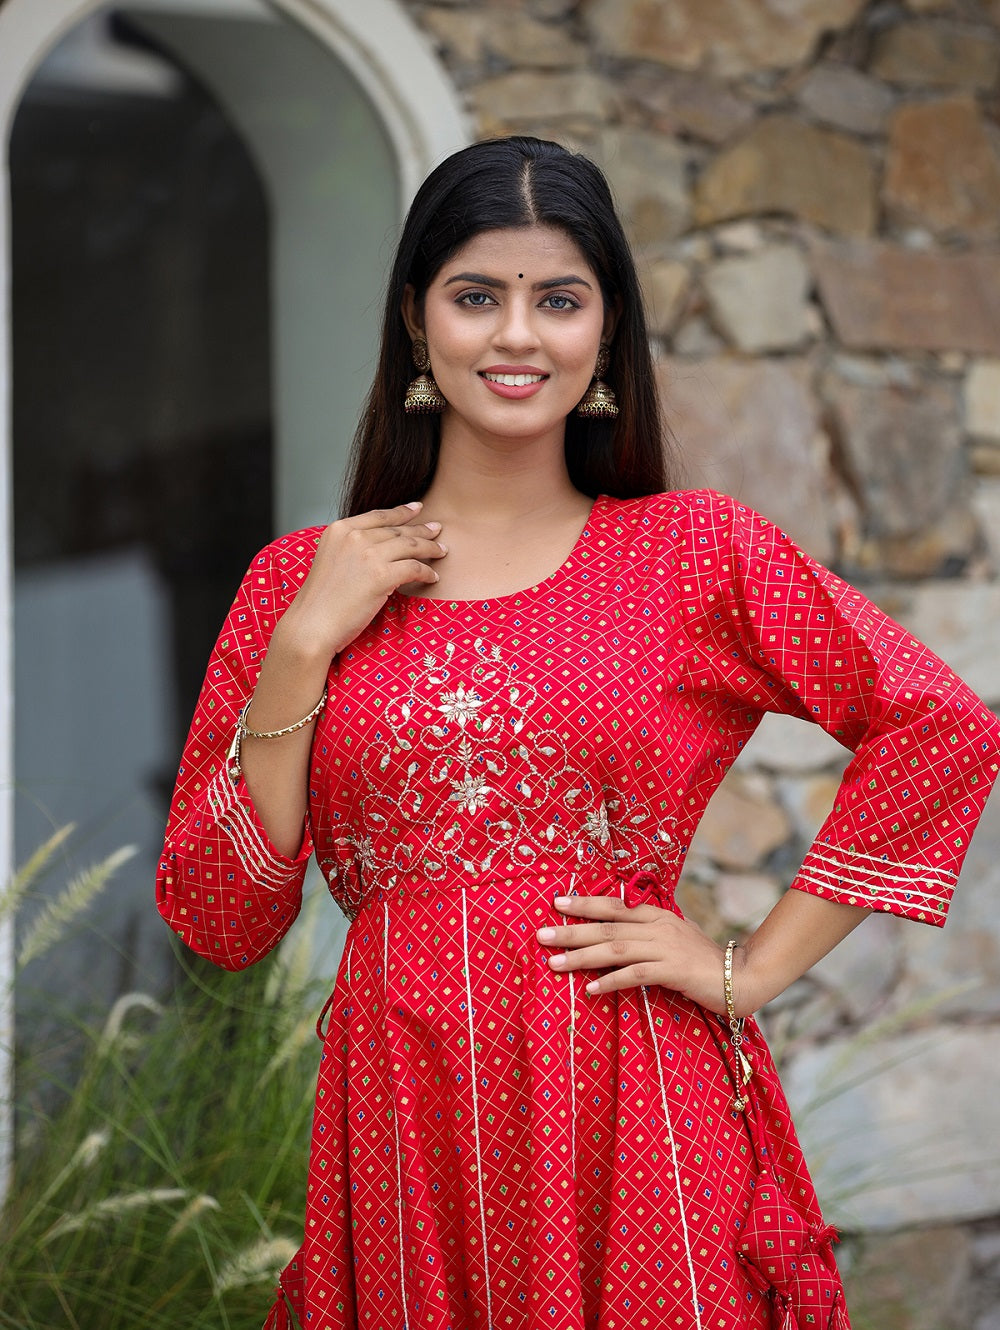 Buy Red Cotton Ethnic Dress for Women | Best Party Wear Ethnic Gown for Ladies     